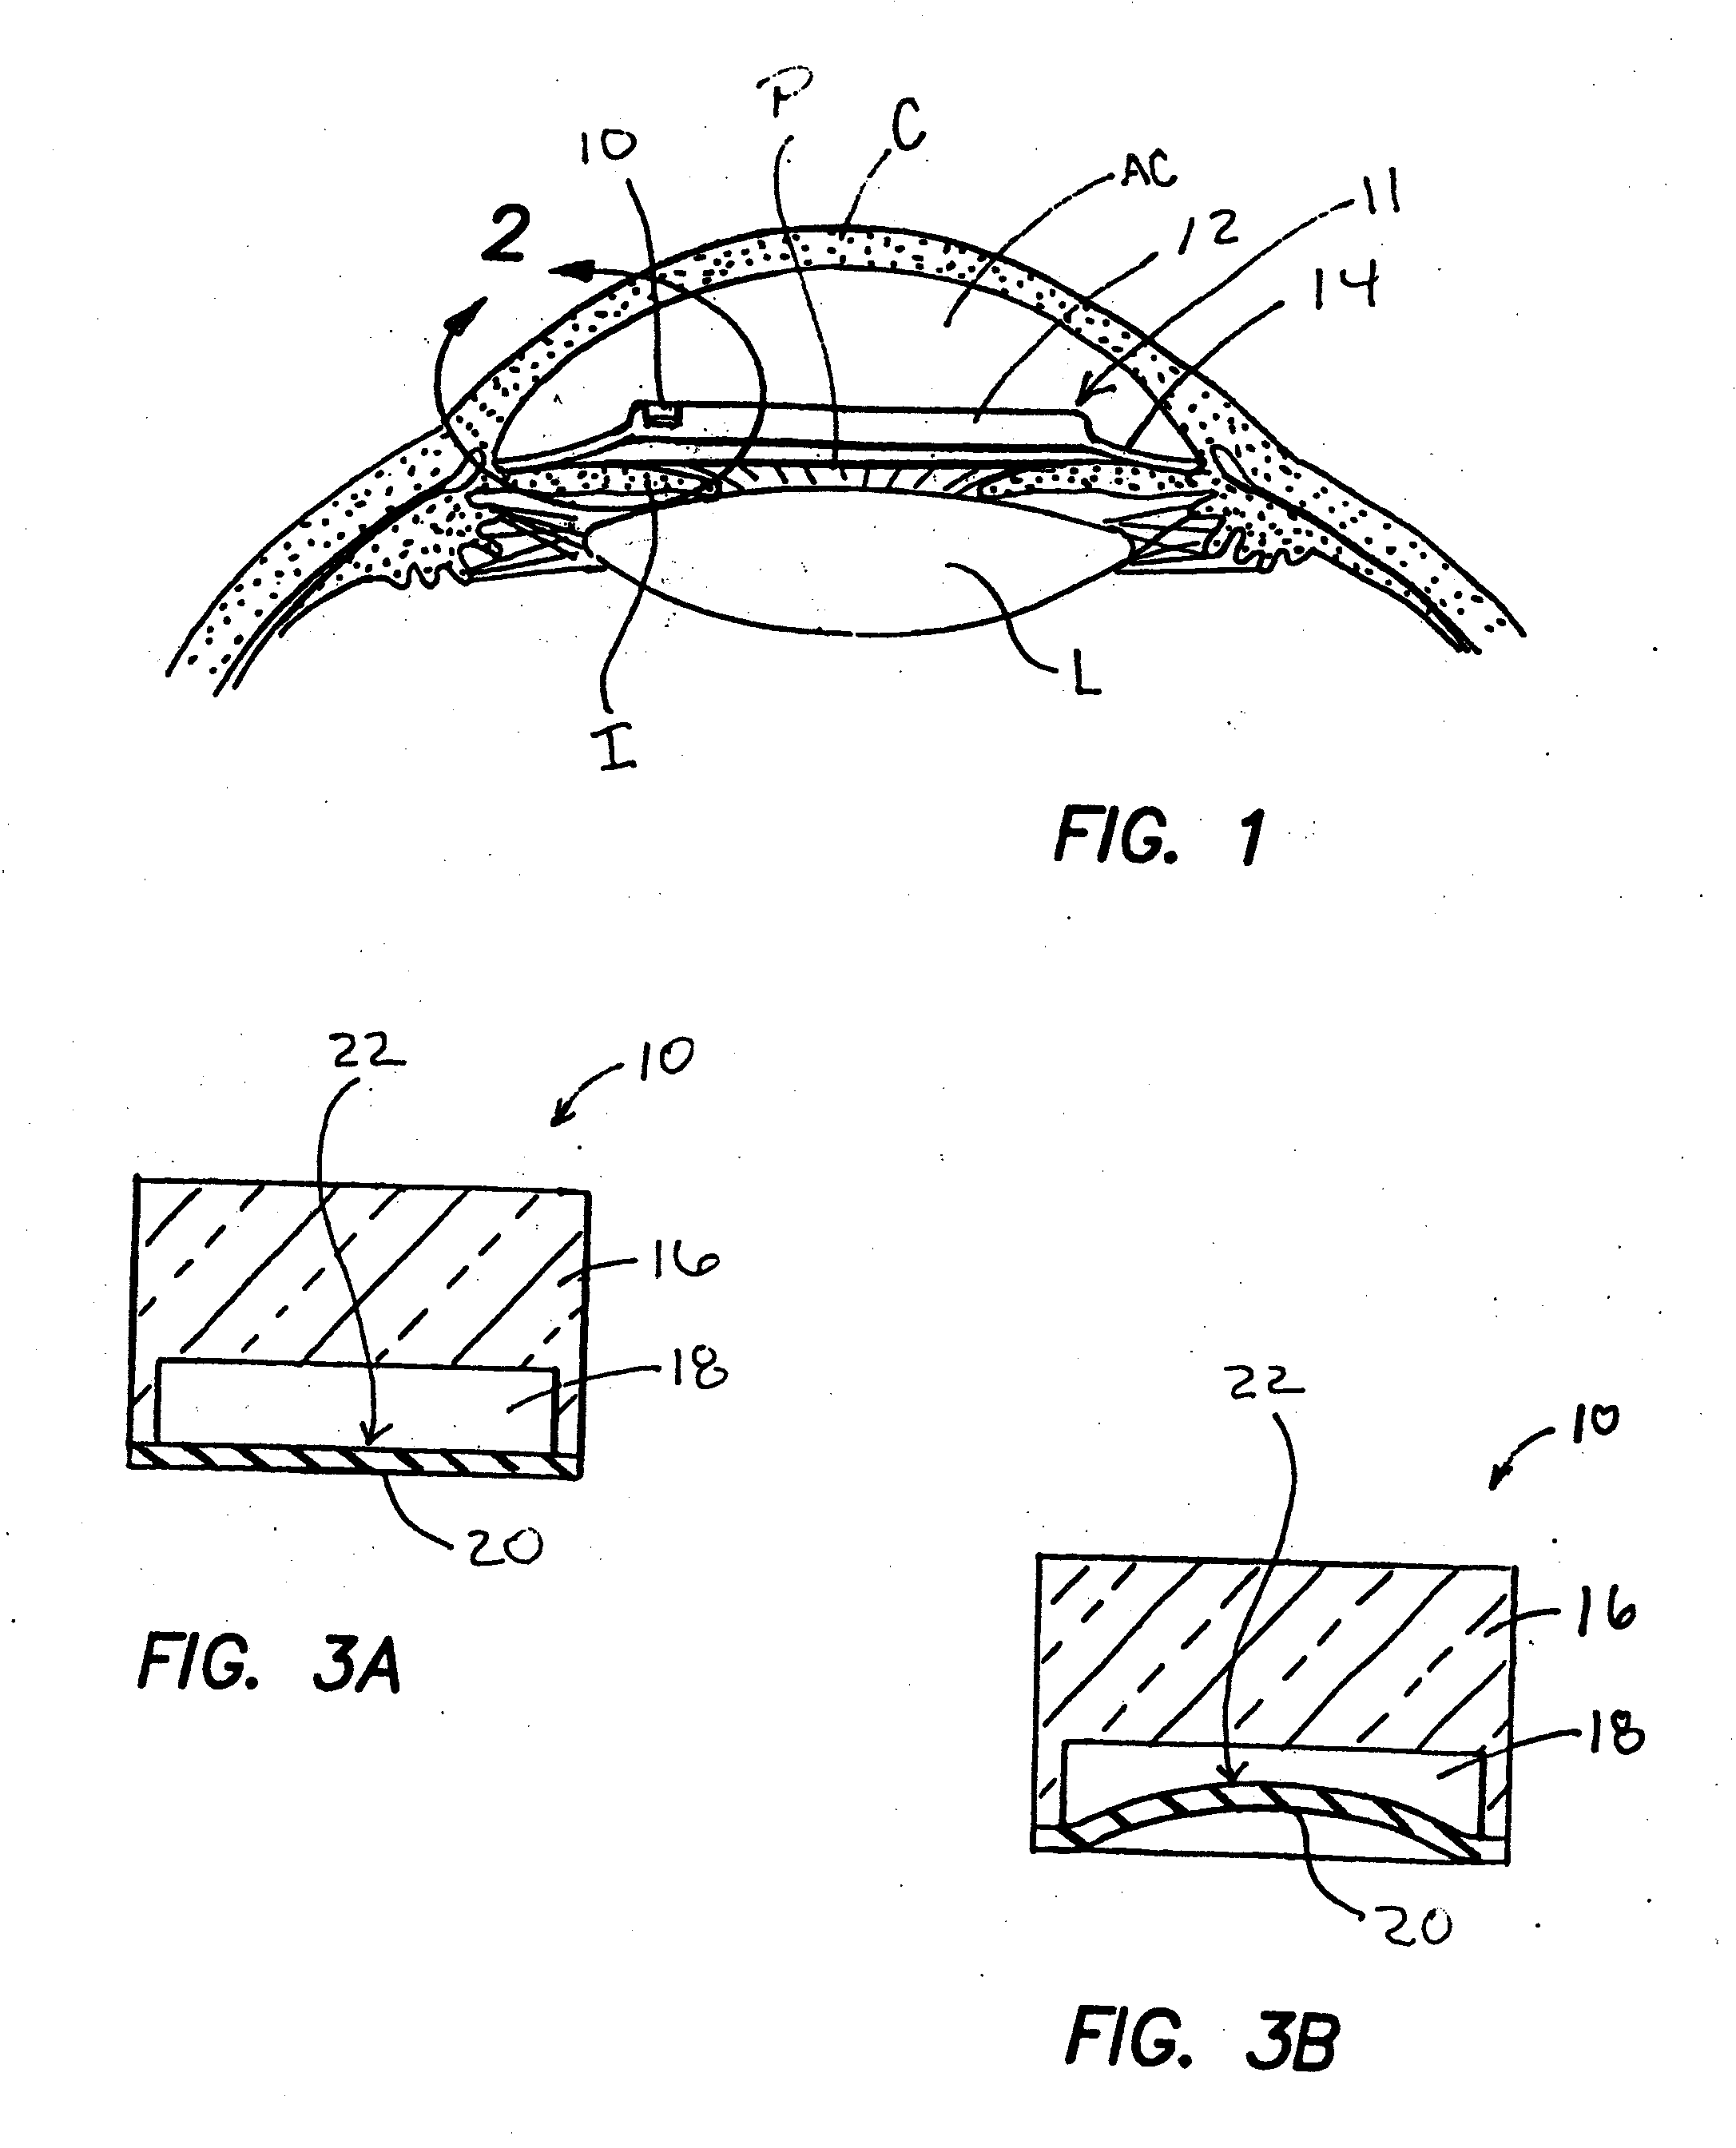 Implantable Devices and Methods for Measuring Intraocular, Subconjunctival or Subdermal Pressure and/or Analyte Concentration